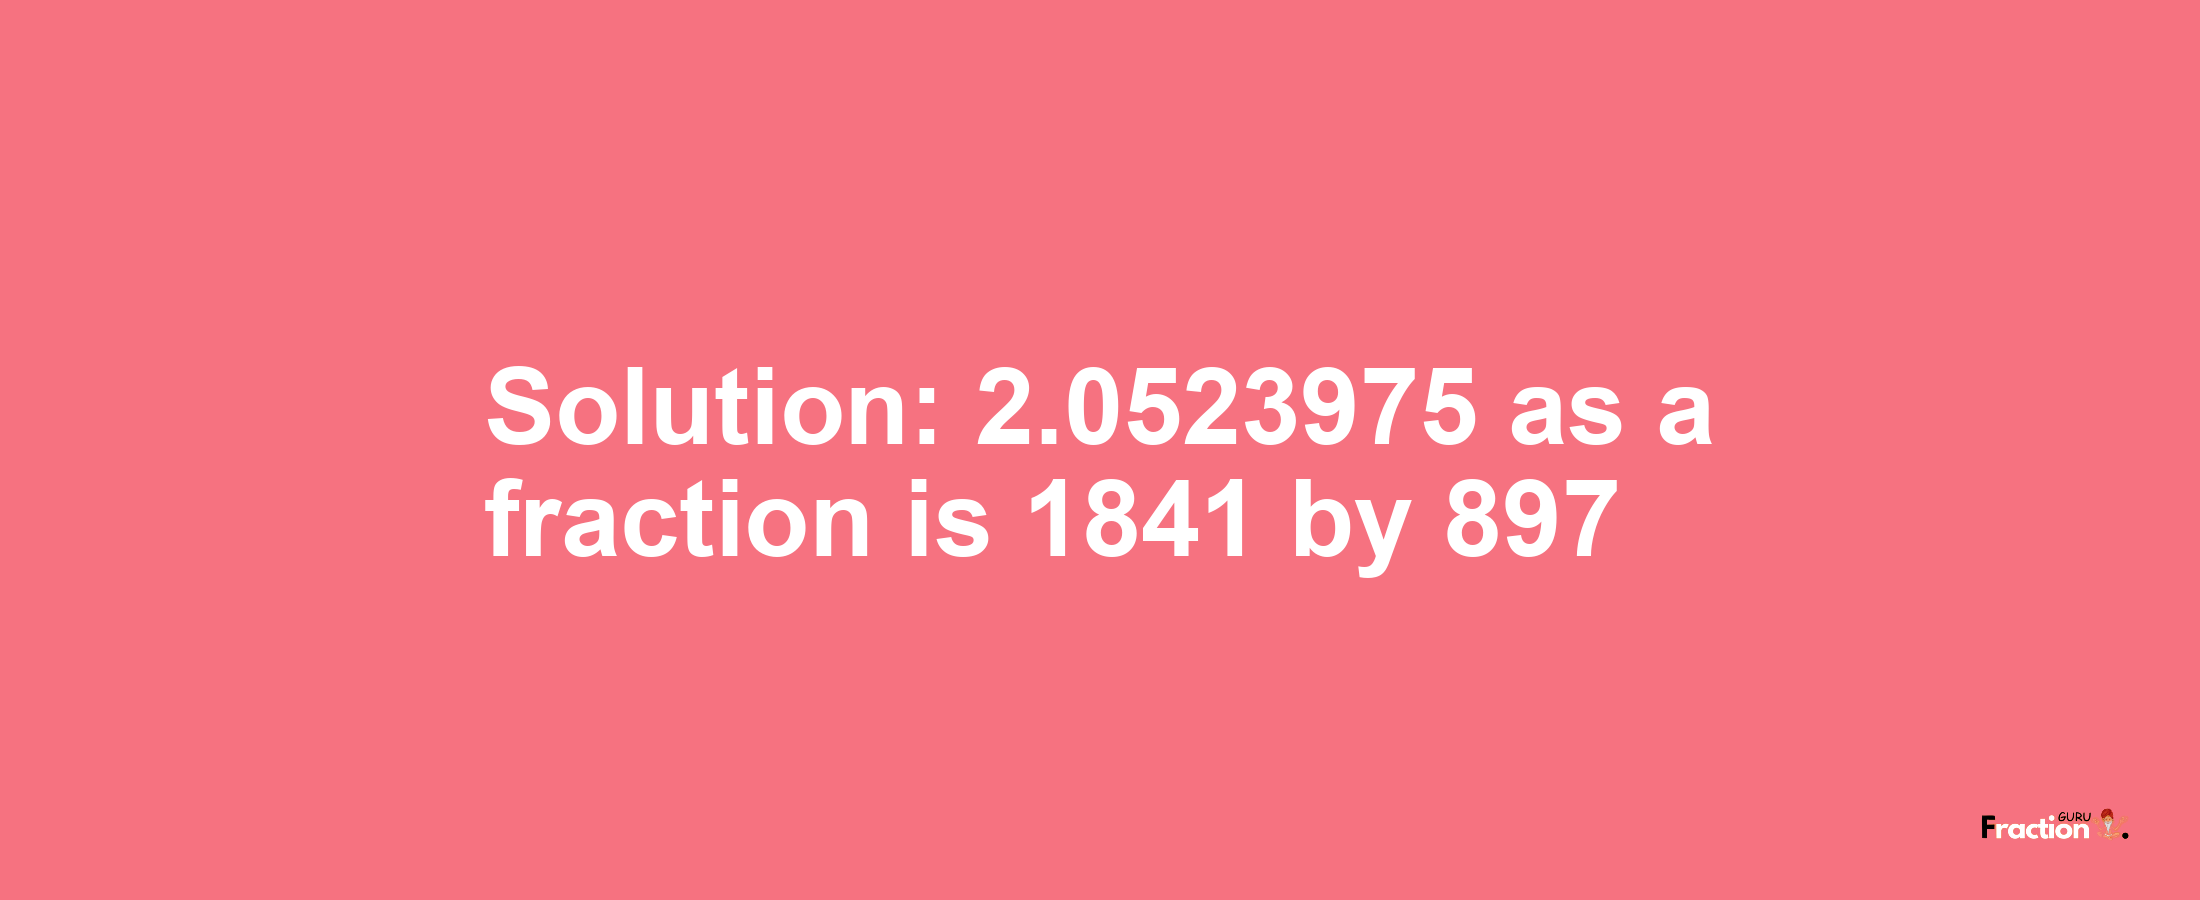 Solution:2.0523975 as a fraction is 1841/897